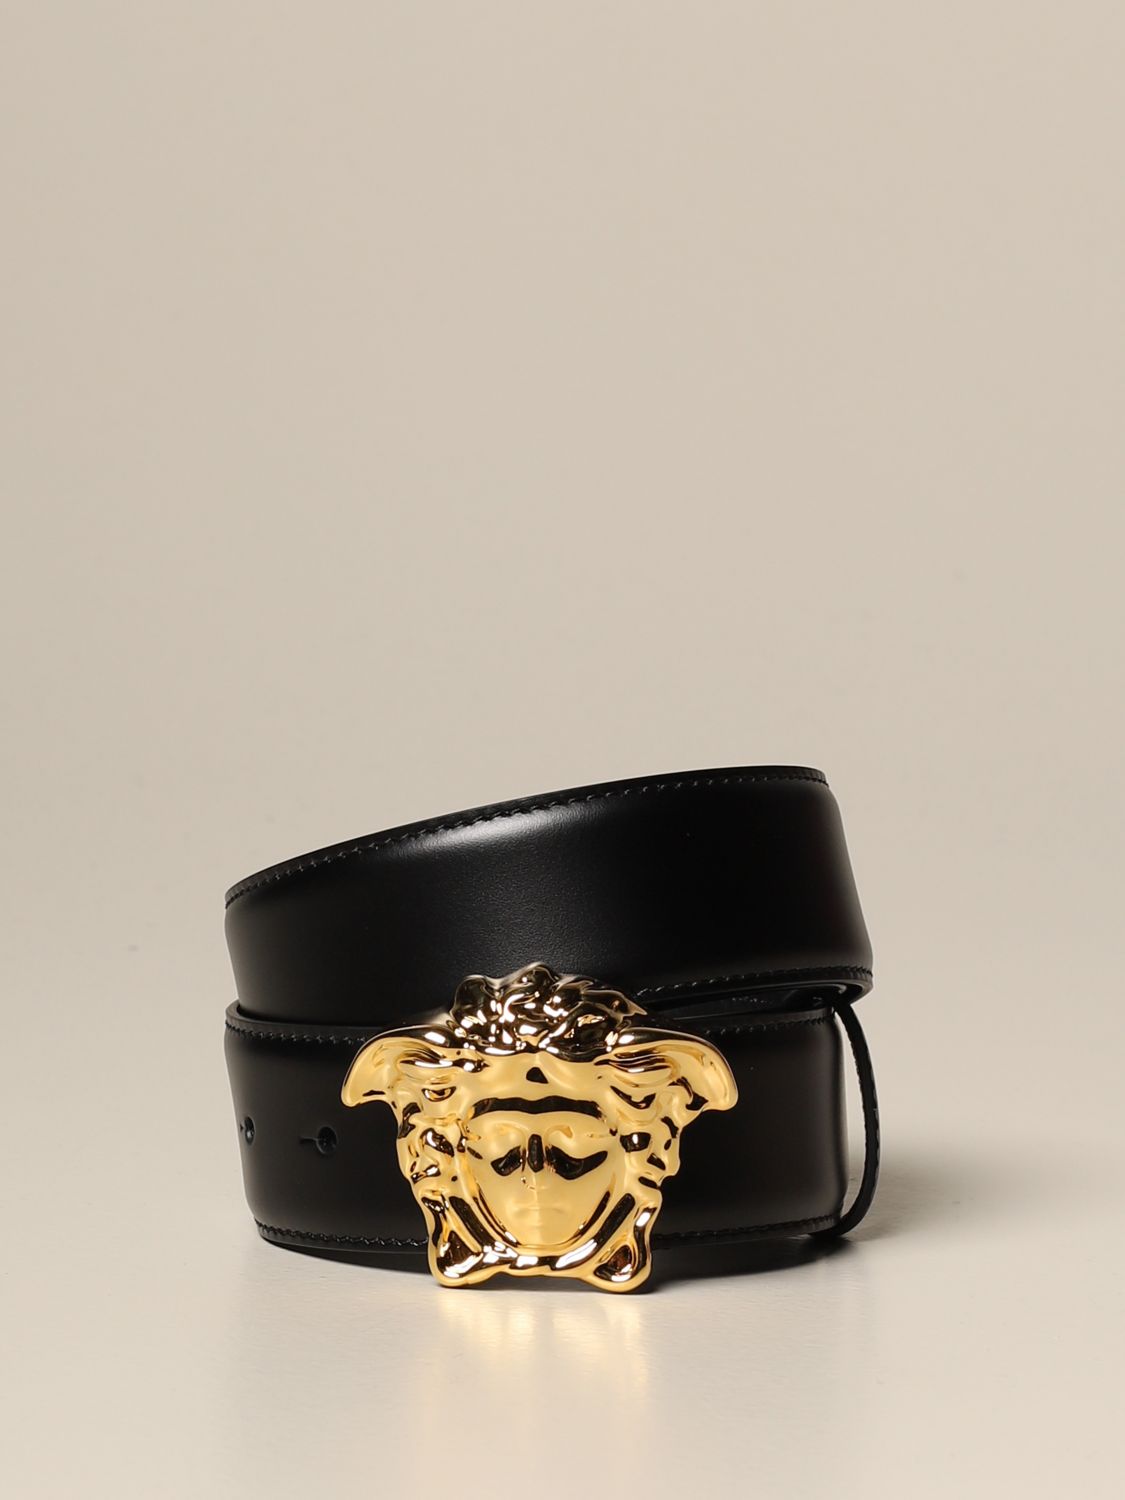 Versace Medusa Palazzo belt ($405) ❤ liked on Polyvore featuring